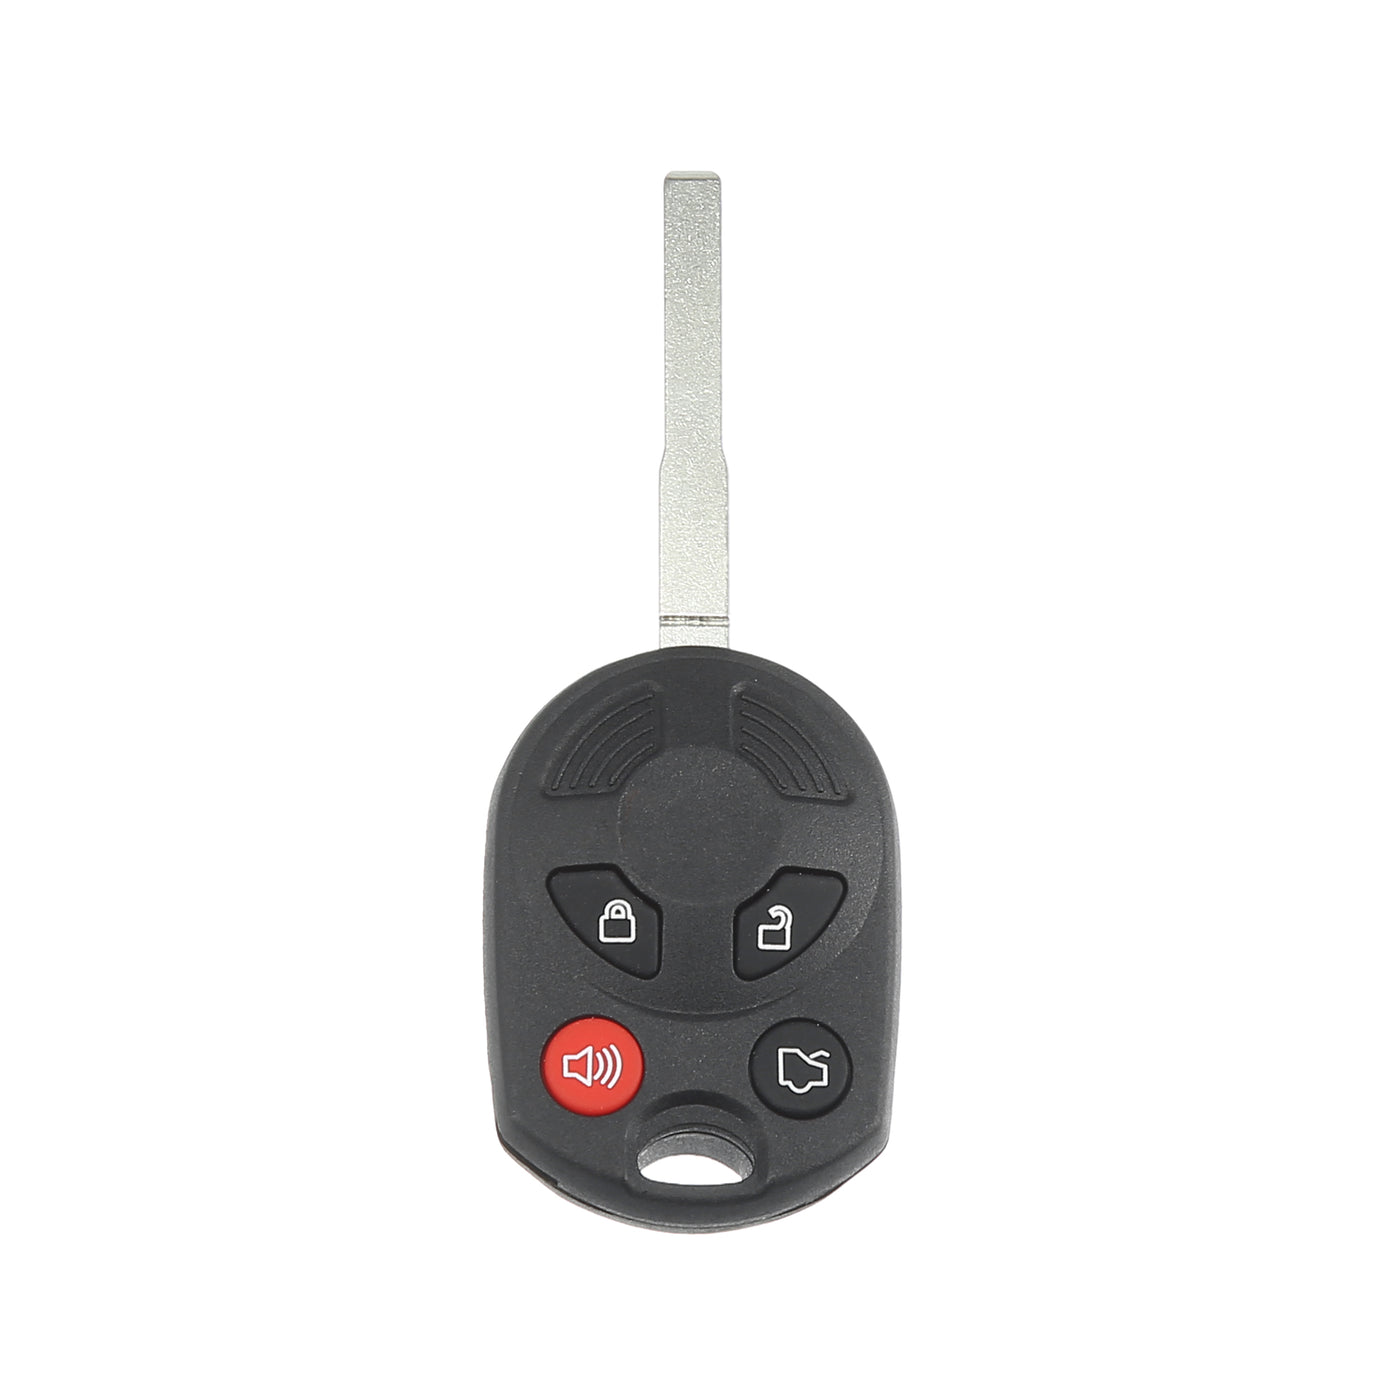 X AUTOHAUX 4 Button Car Keyless Entry Remote Control Replacement Key Fob Proximity Smart Fob OUCD6000022 for Ford Escape 2013-2019 315MHz Chip 63 80